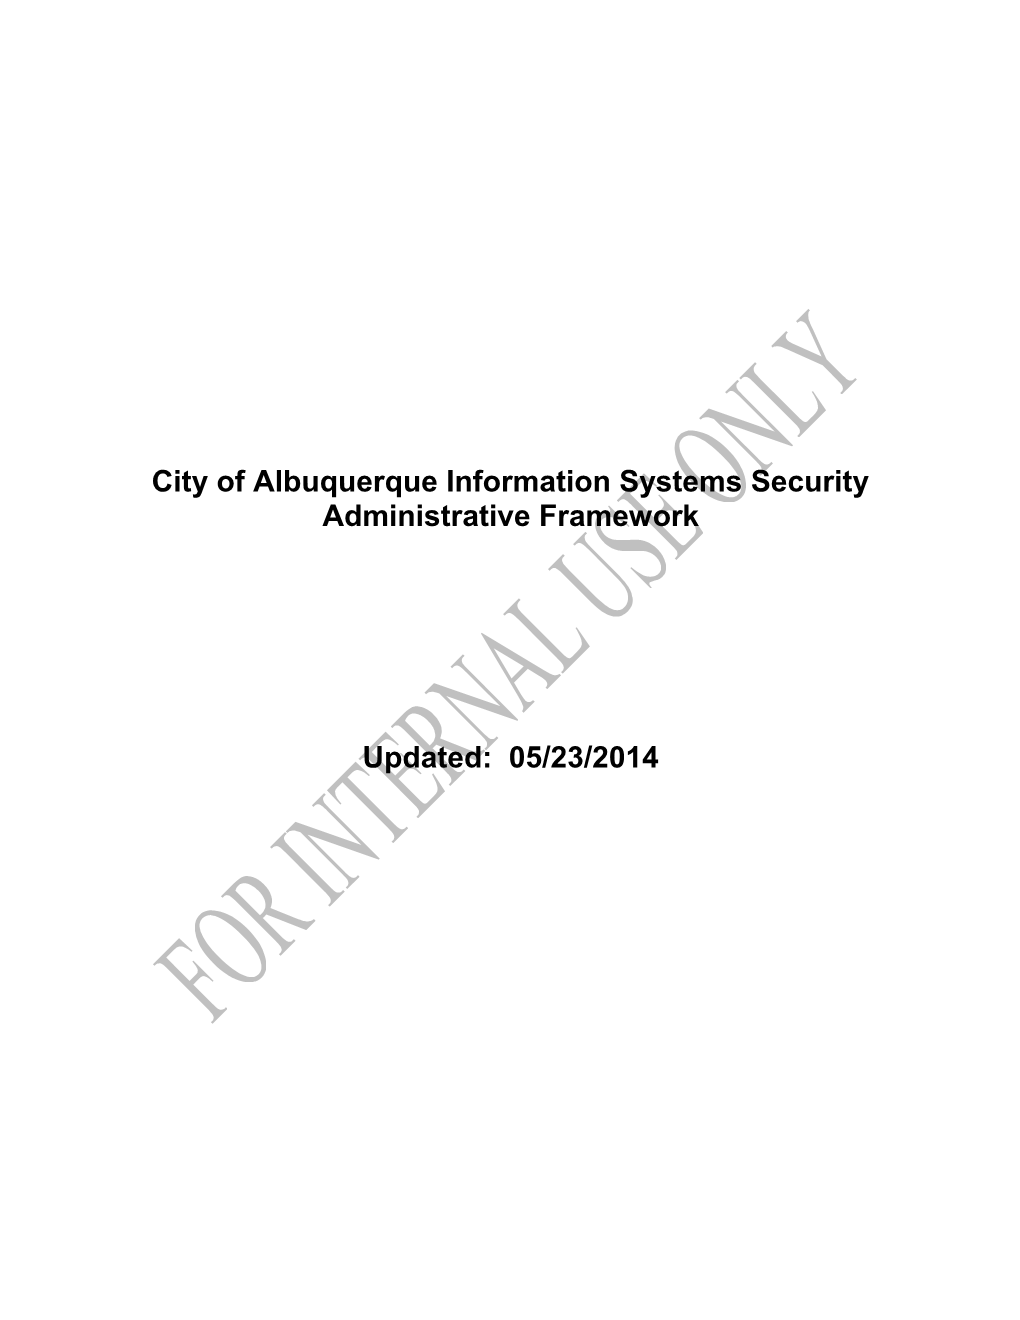 City of Albuquerqueinformation Systems Security Administrative Framework